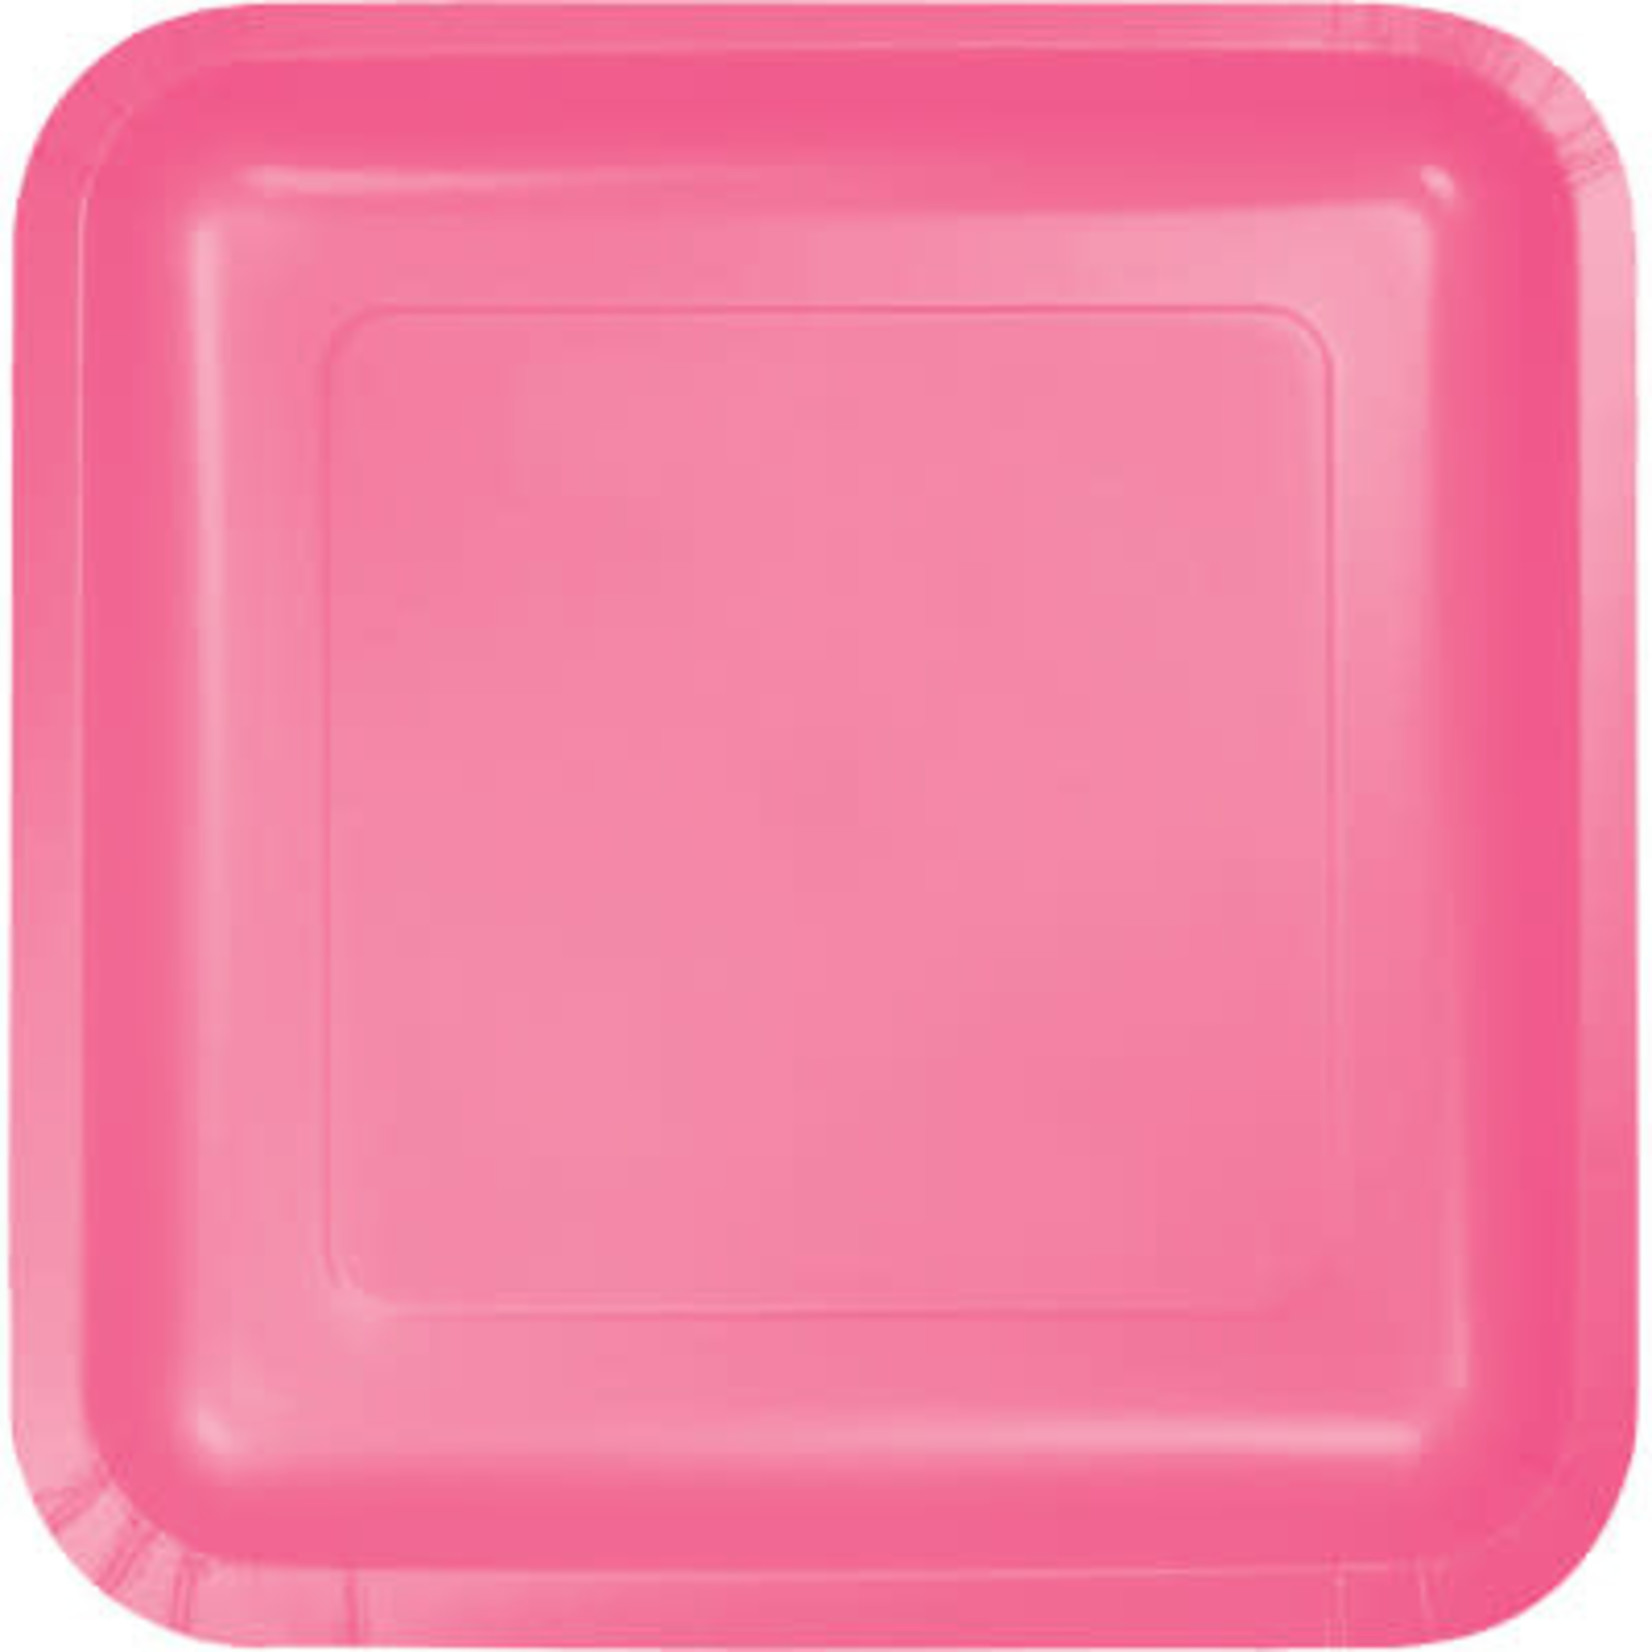 Touch of Color 7" Candy Pink Square Paper Plates - 18ct.